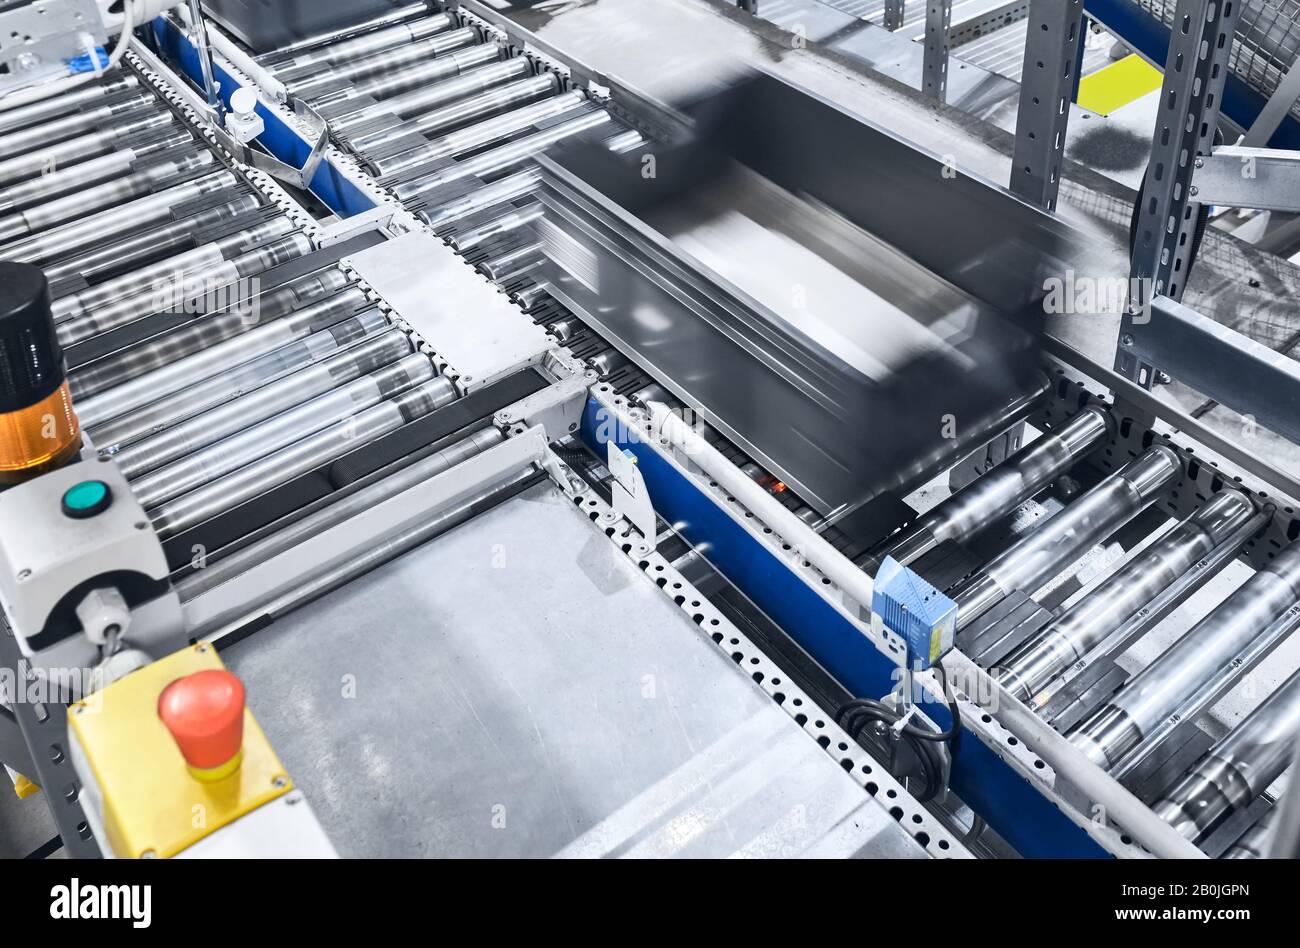 Modern conveyor system with box in motion, shallow depth of field. Stock Photo